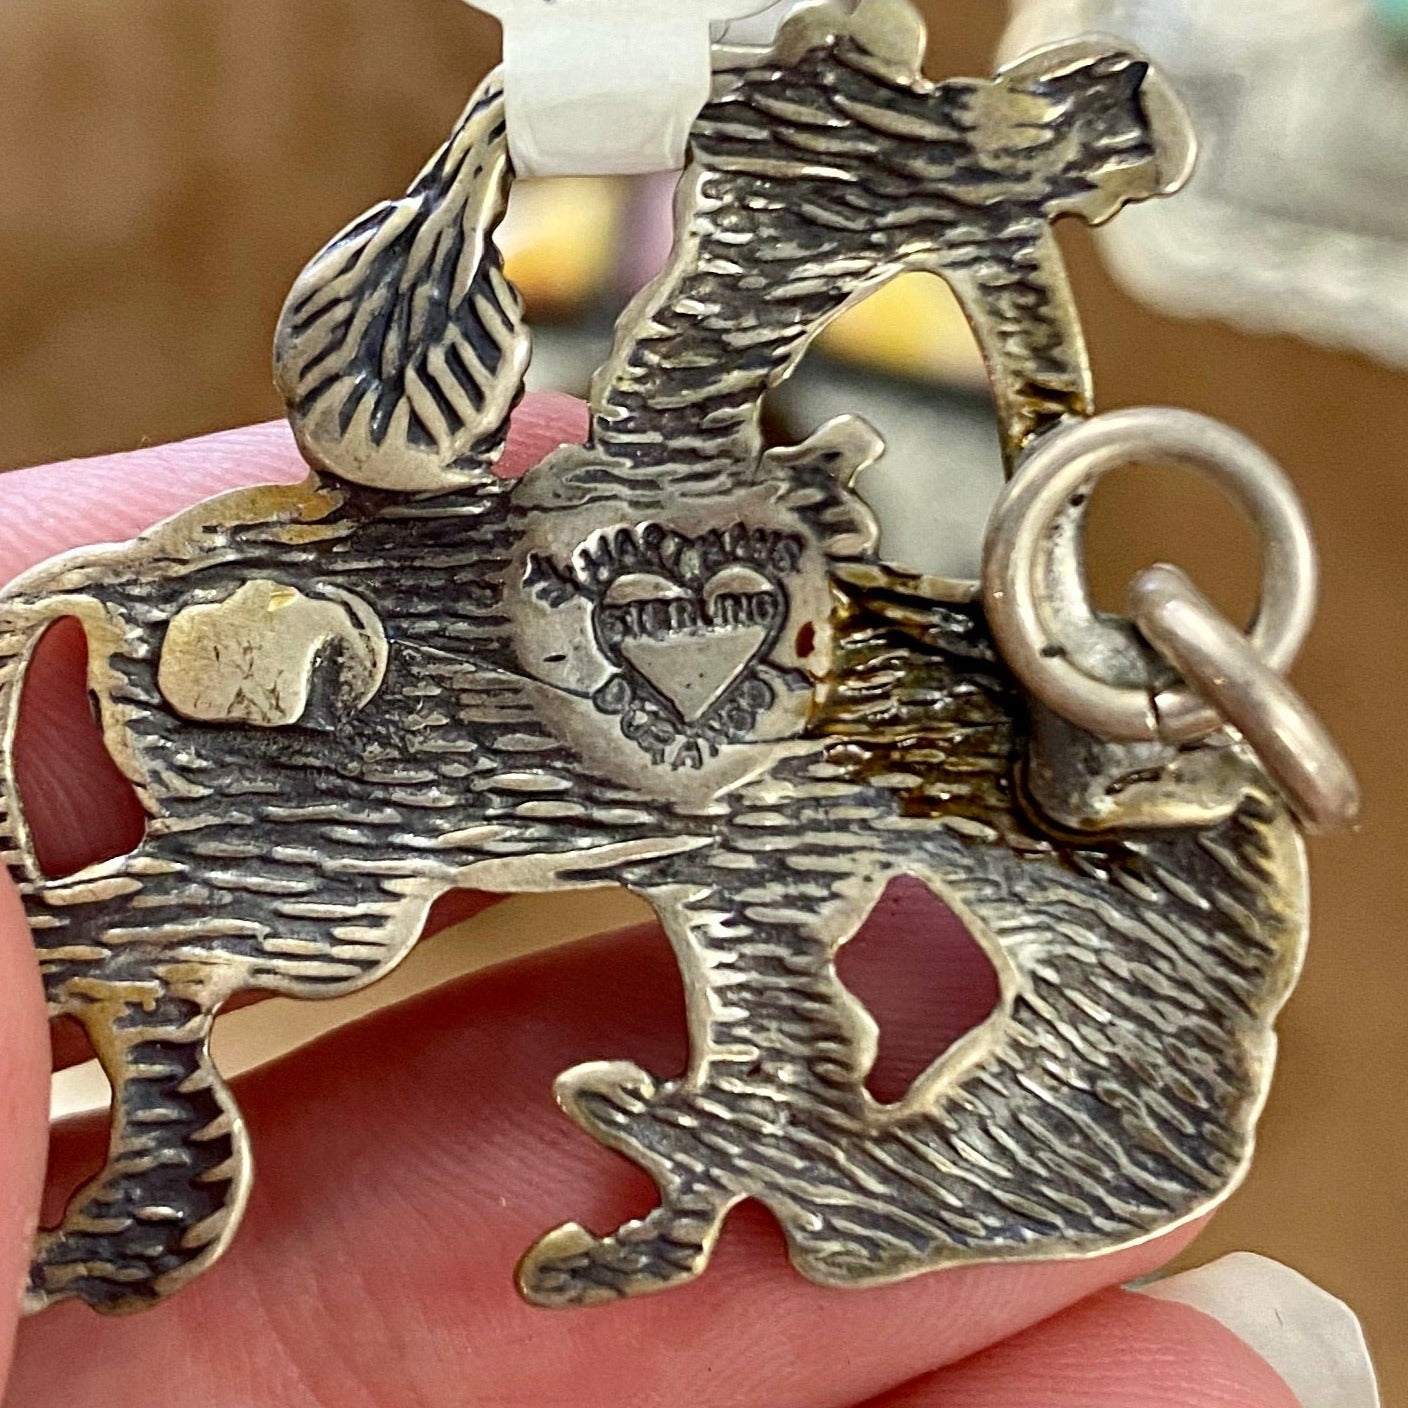 Bucking bronco cowboy sterling silver pendant/charm. The perfect addition to anyone's jewelry collection. This piece is stamped, please see photos below for hallmark. This pendant is so fun and unique. It would make for a beautiful addition to your next outfit or gift it to a loved one!   Size: 1.25” Inches length   Signed: Yes